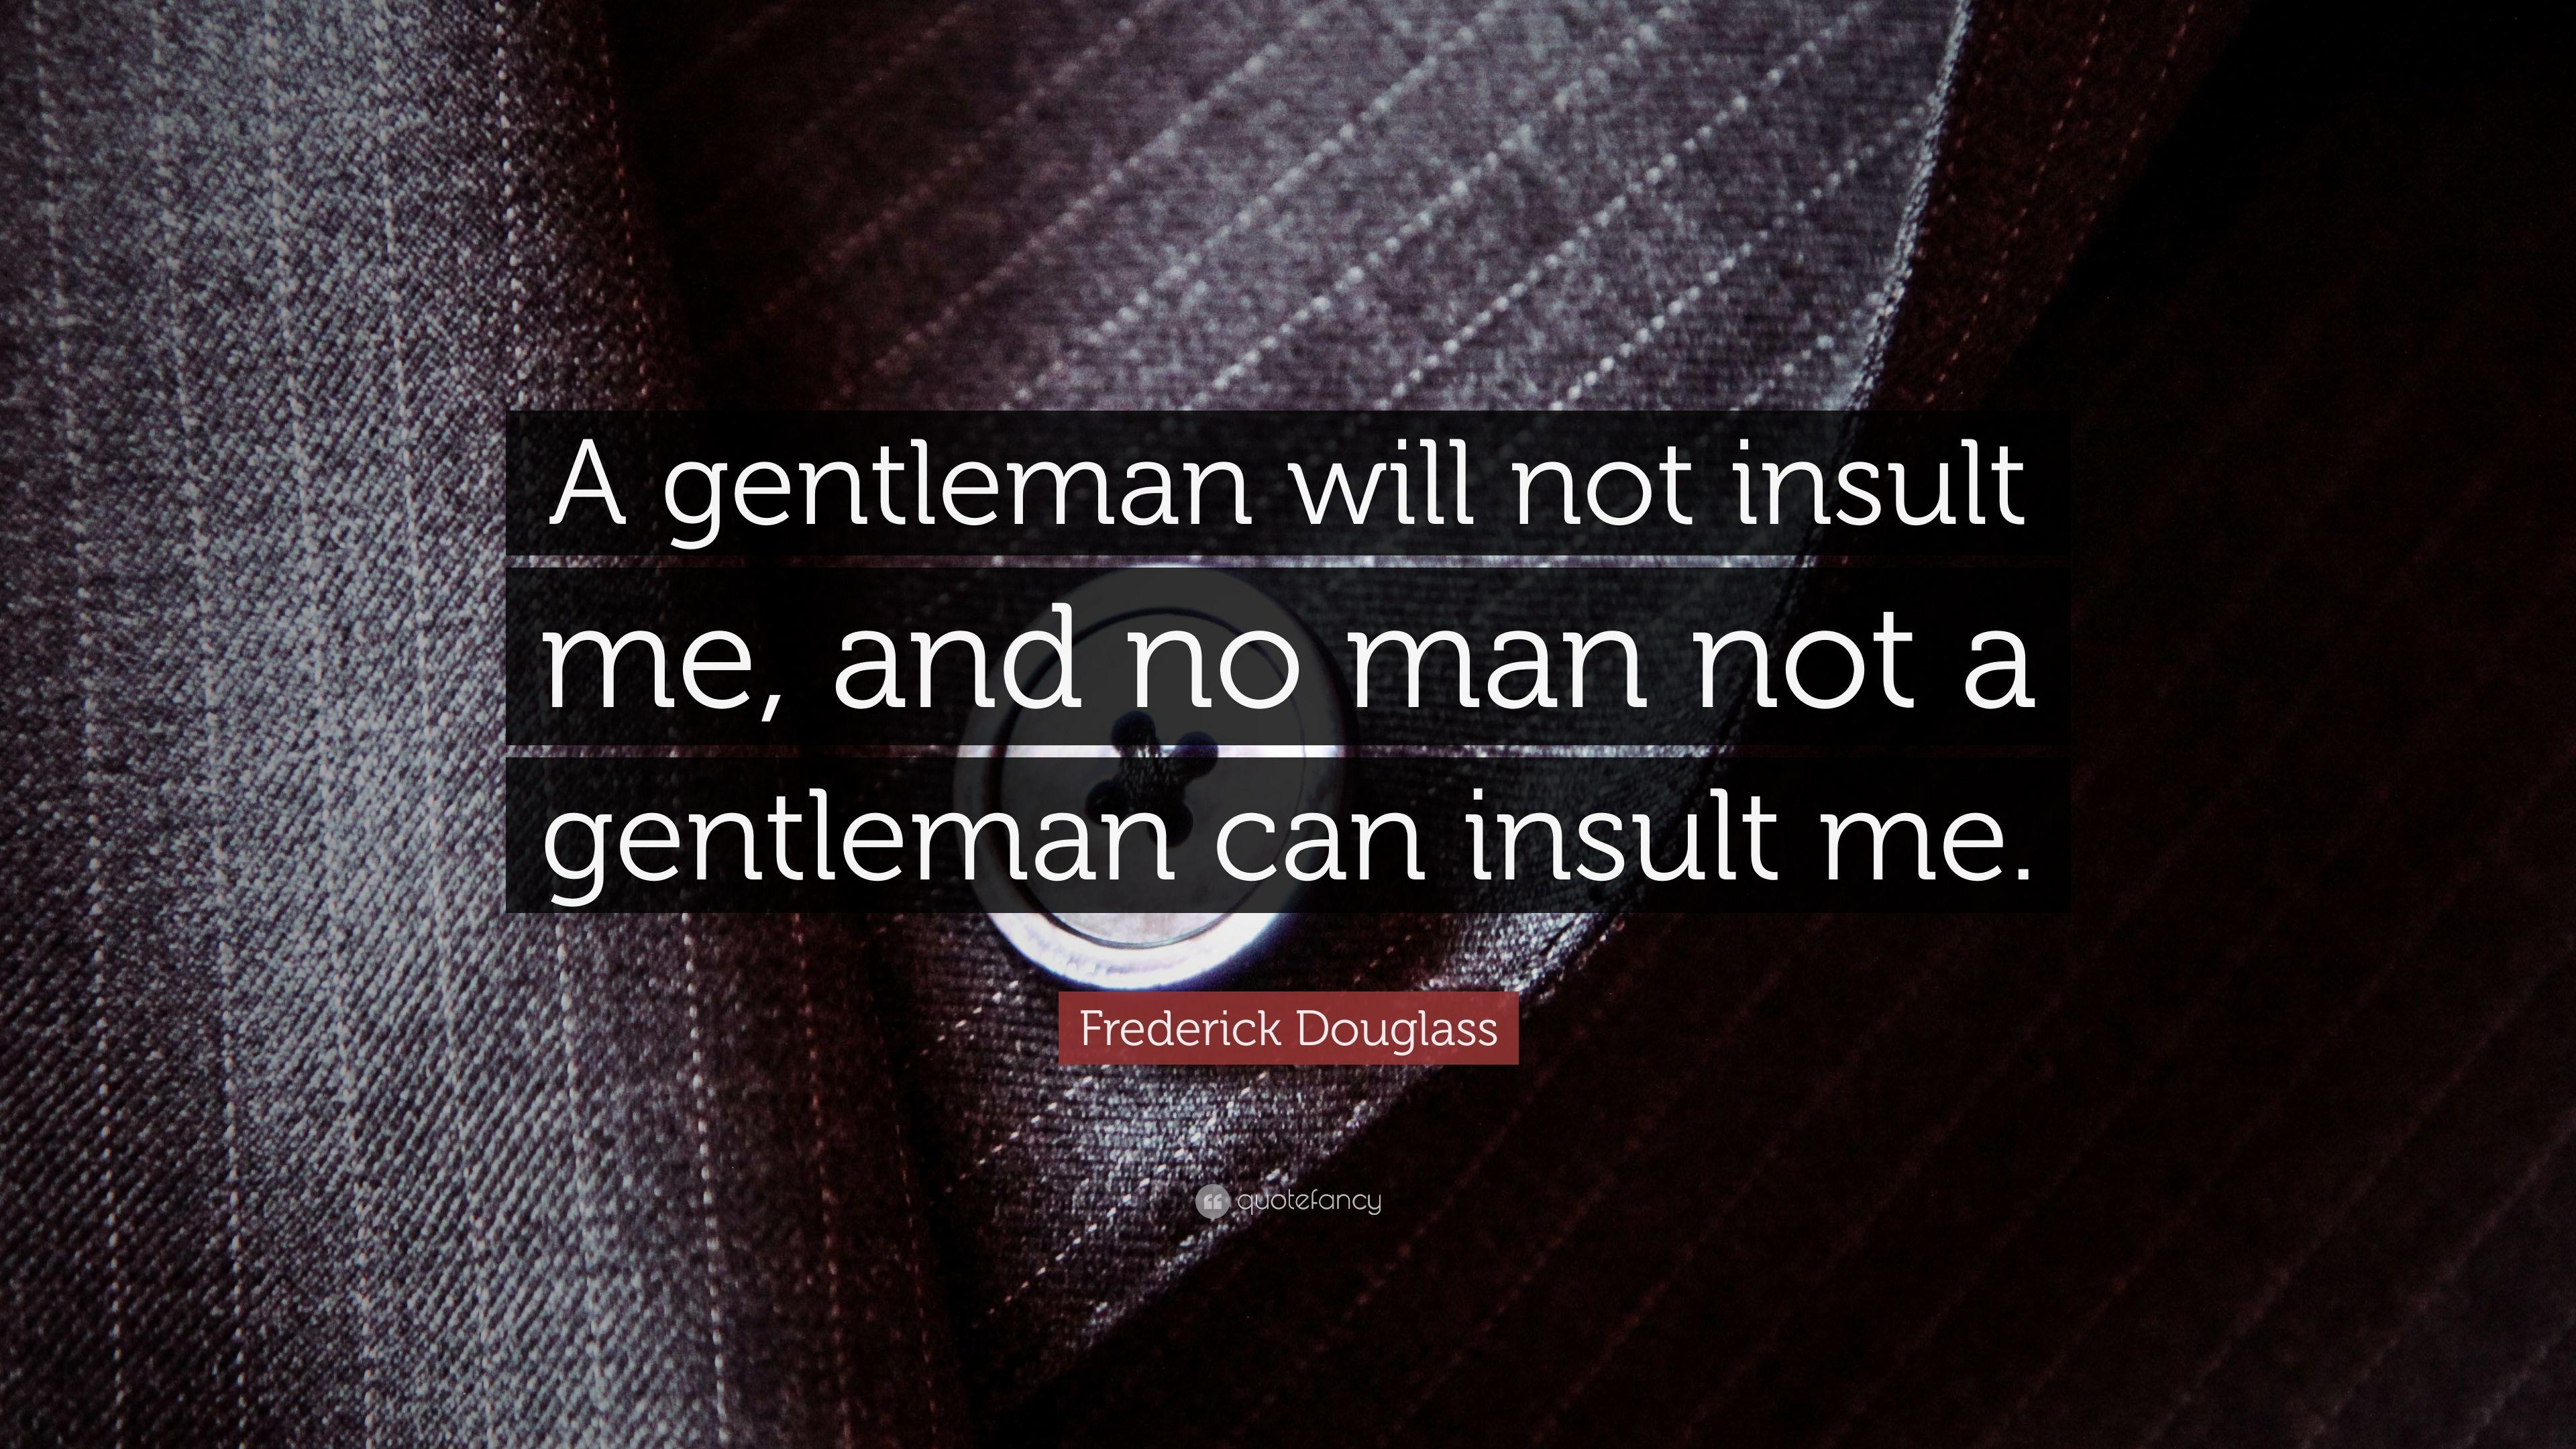 Frederick Douglass Quote: “A gentleman will not insult me, and no